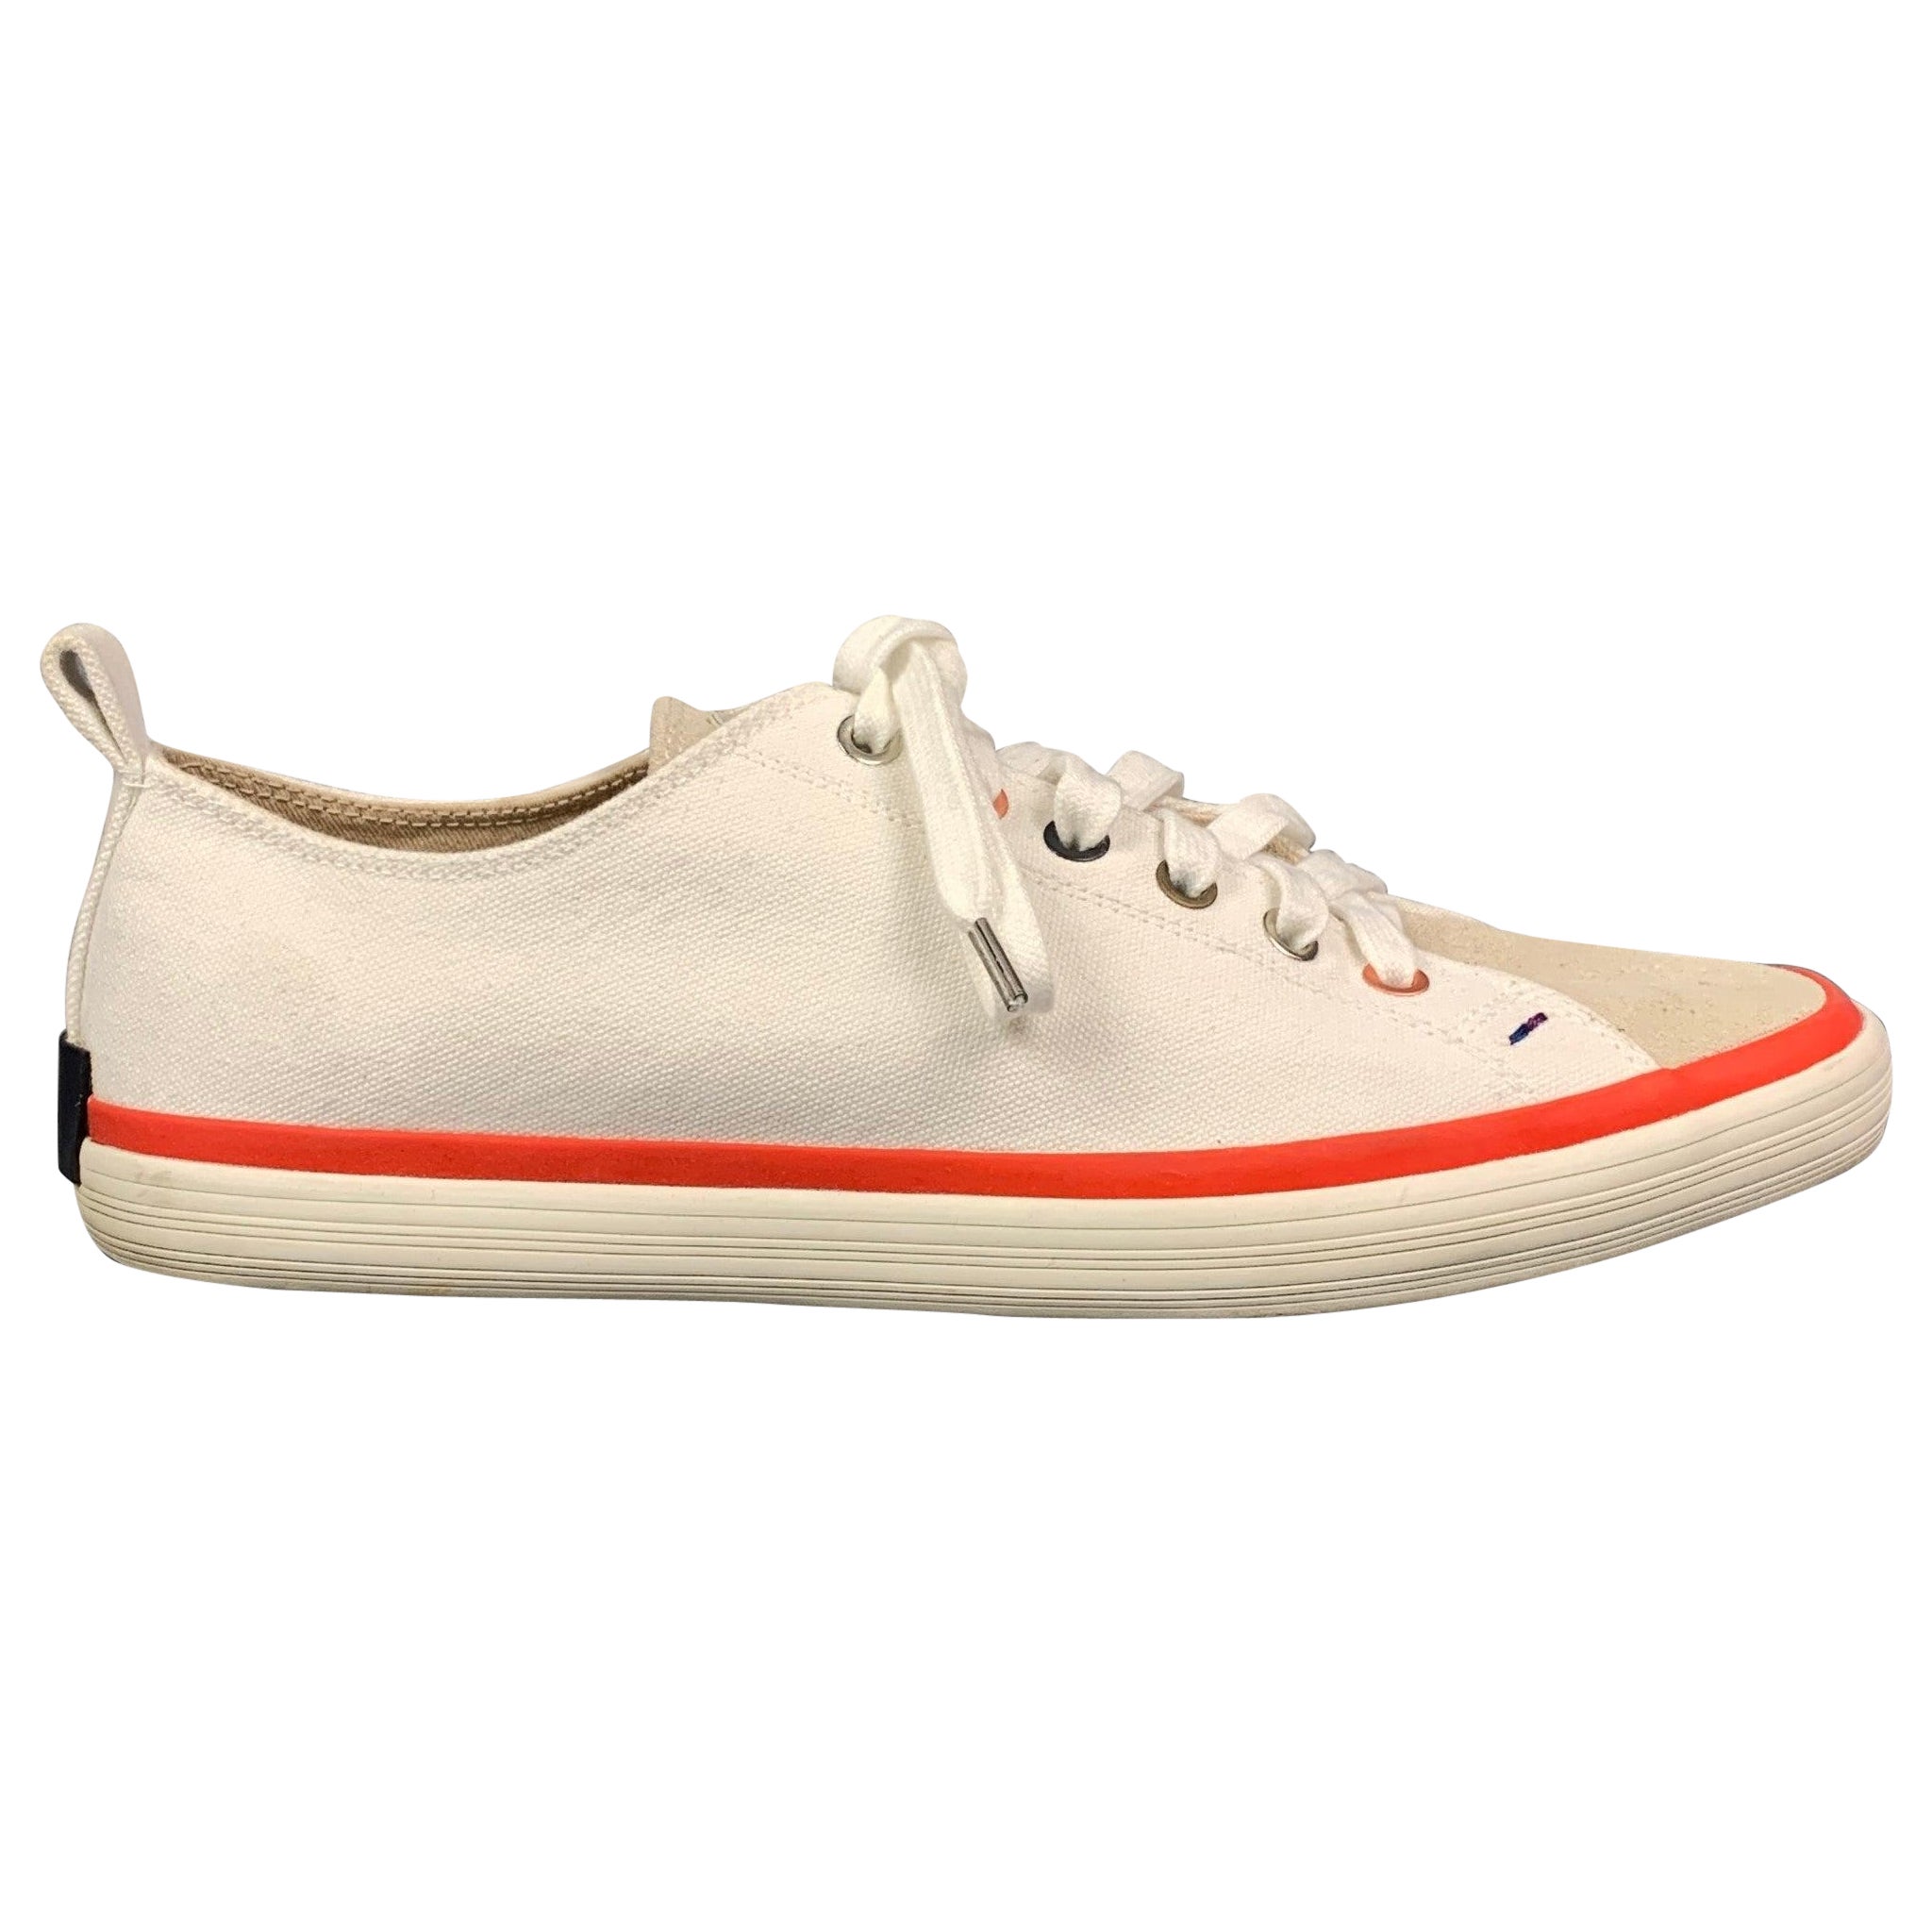 PAUL SMITH Size 7 White Canvas Lace Up Bernard Trainer Sneakers For Sale